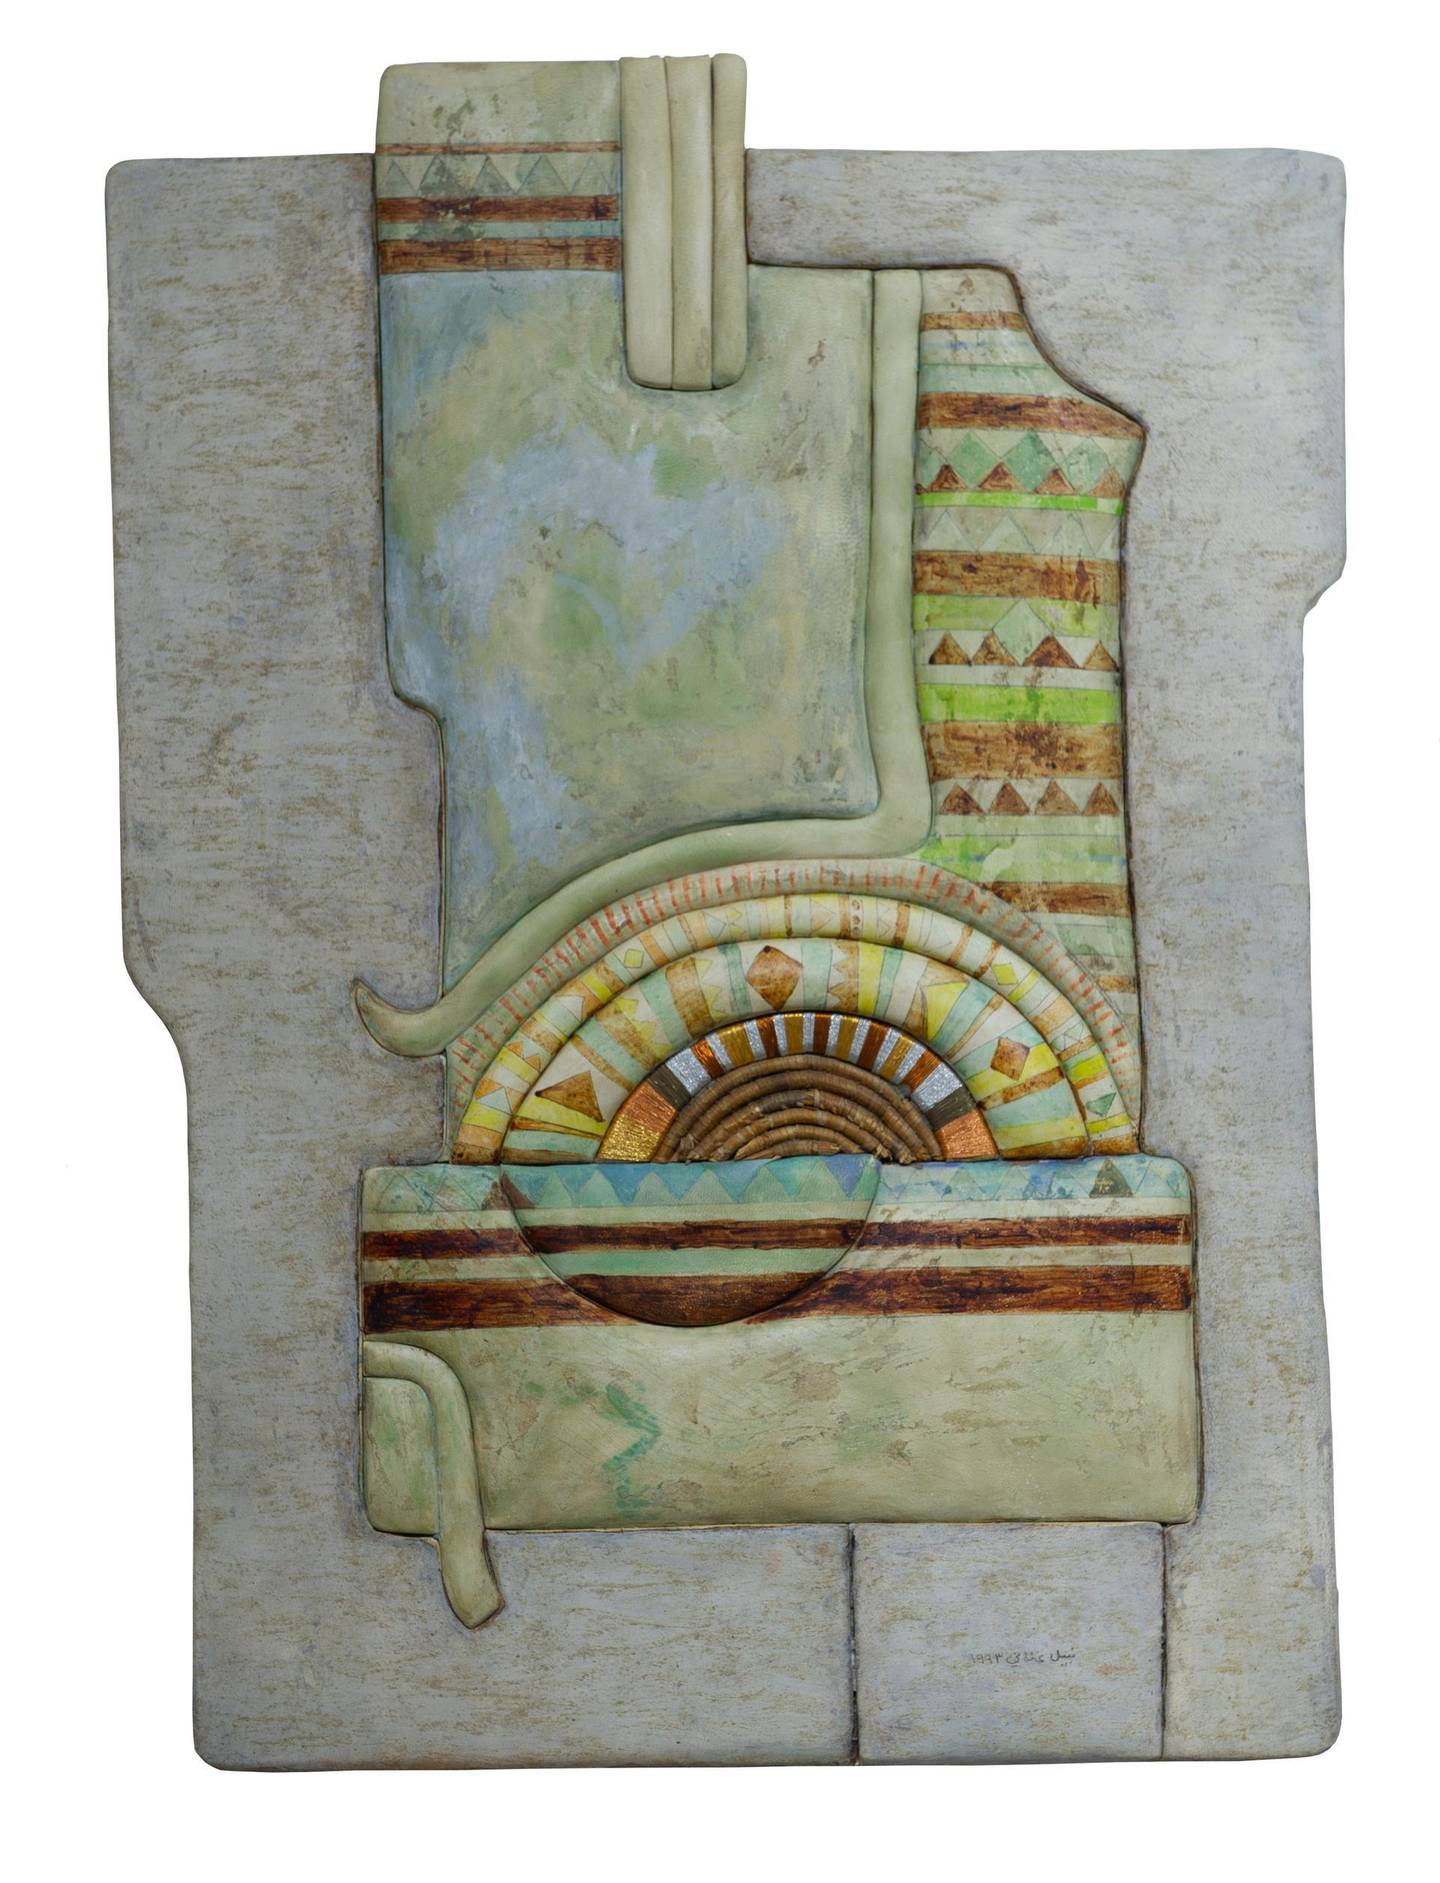 Nabil Anani's 'Palestinian House' (1993), made from leather and mixed media on wood. Courtesy the artist and Zawyeh Gallery